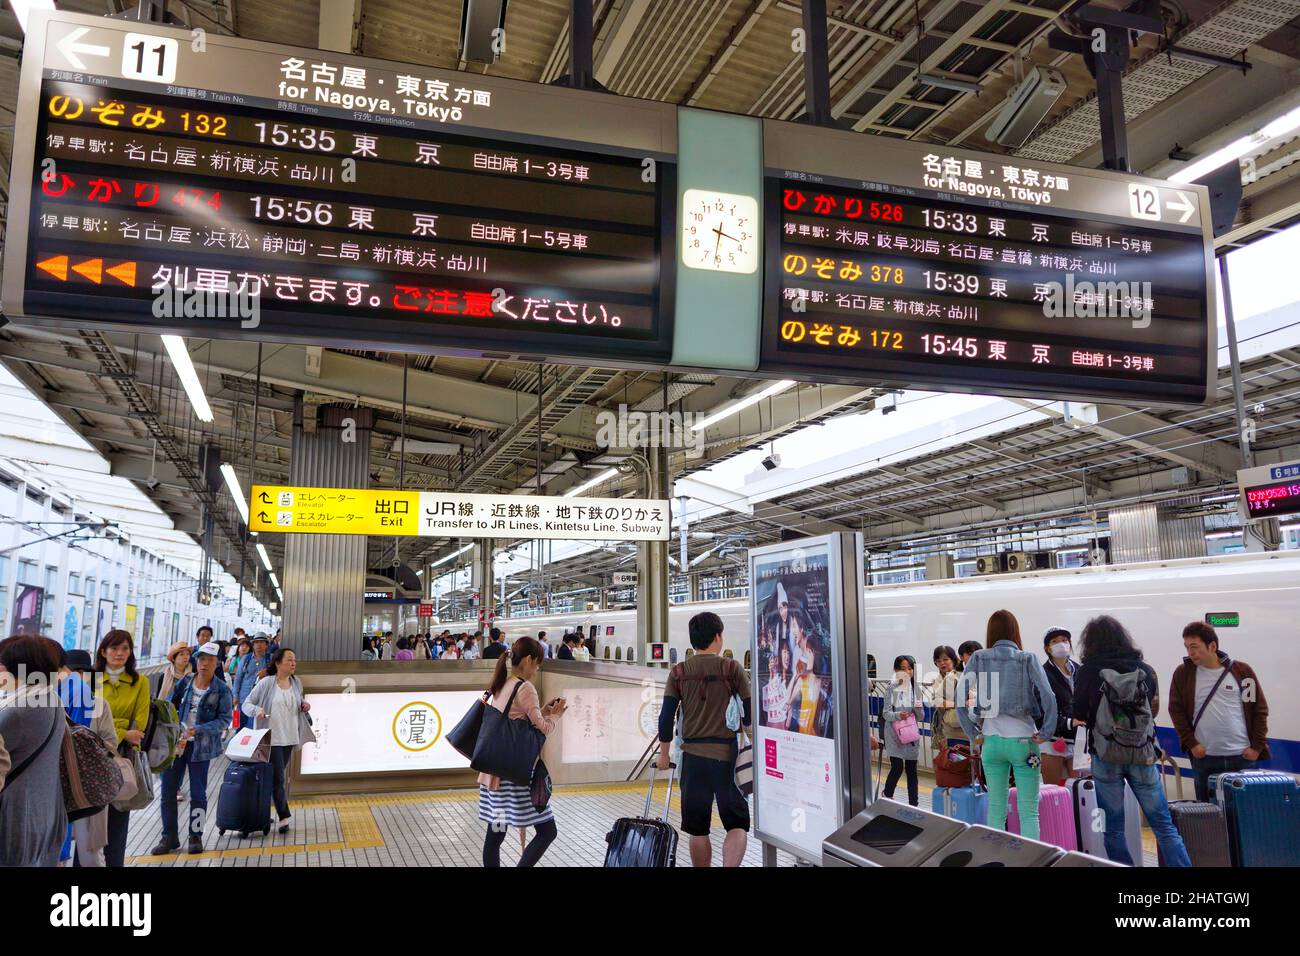 Crowd of people waiting on platform at Kyoto railway station with big train schedule information board hanging from ceiling. Stock Photo